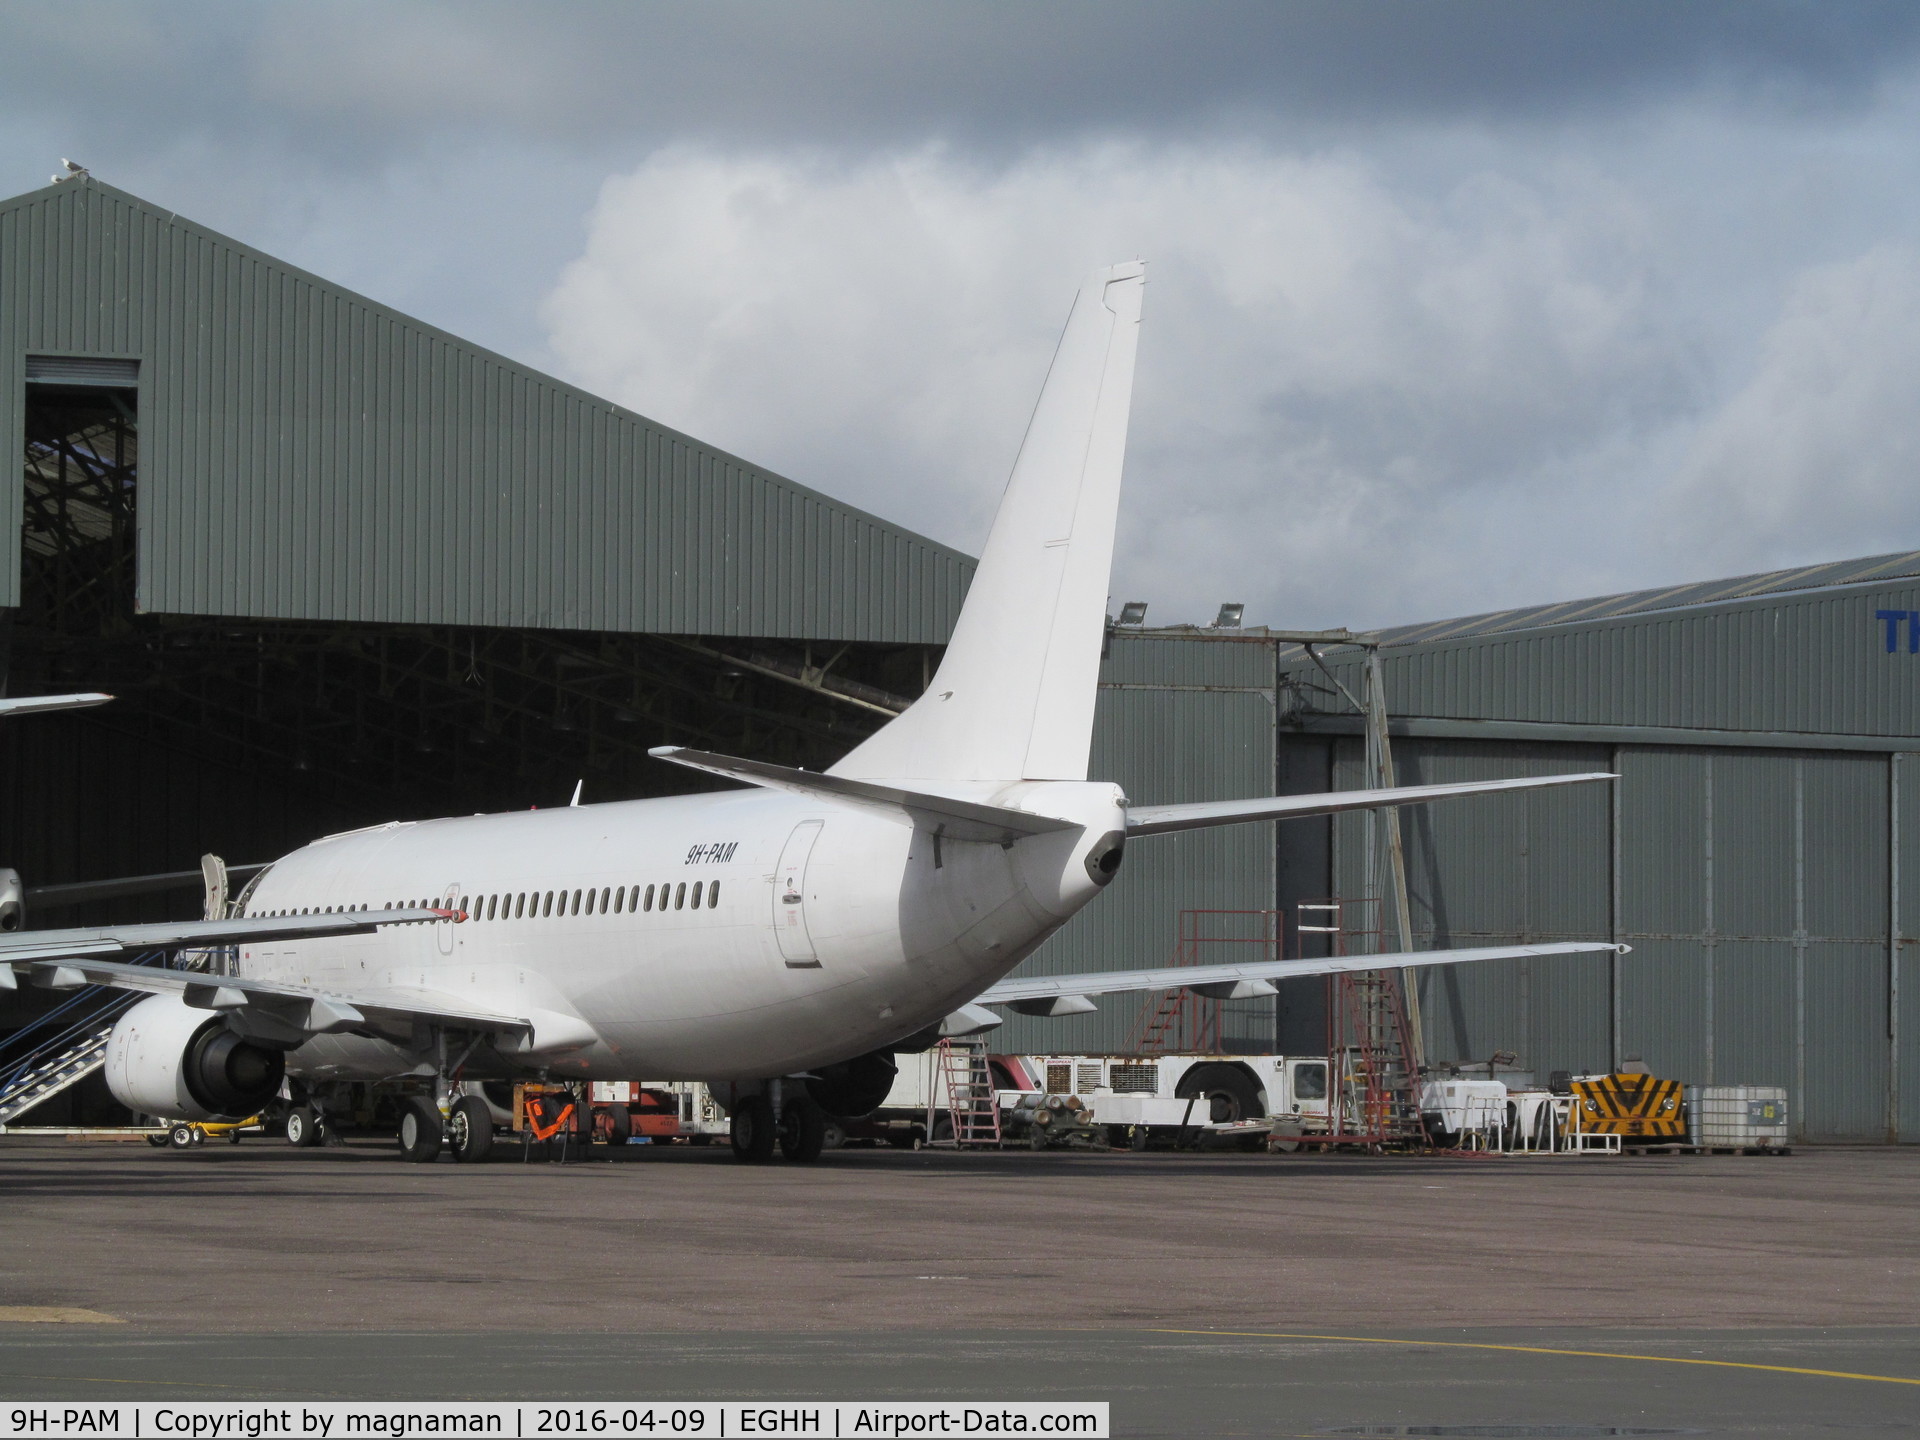 9H-PAM, 1991 Boeing 737-33A C/N 25744, At home base of 737 heaven which is Hurn